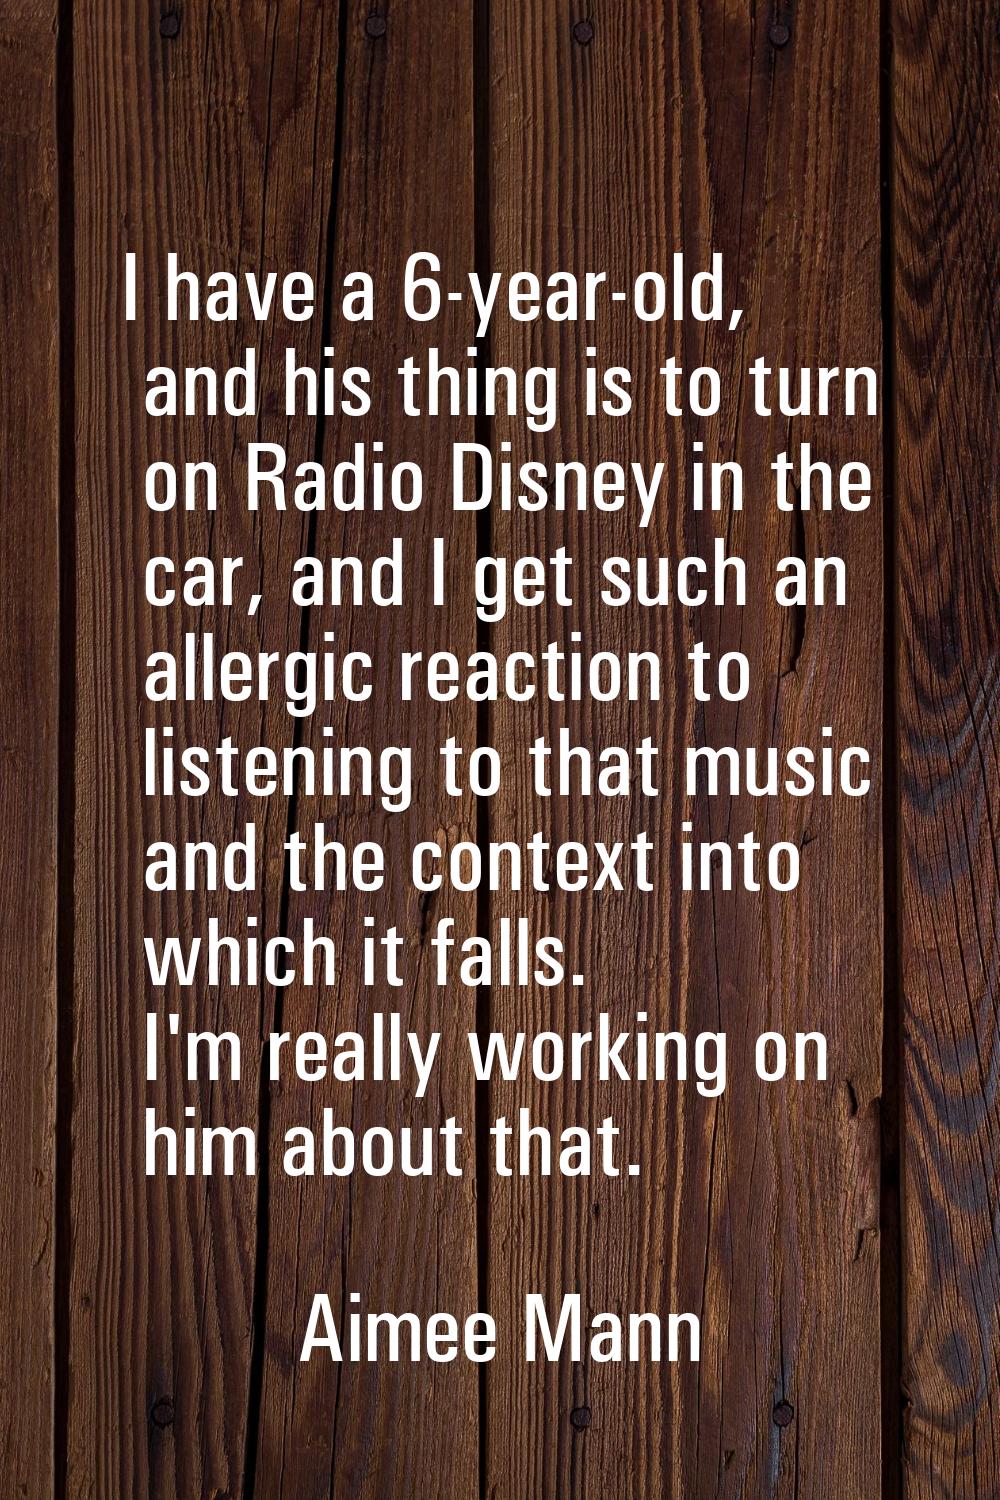 I have a 6-year-old, and his thing is to turn on Radio Disney in the car, and I get such an allergi